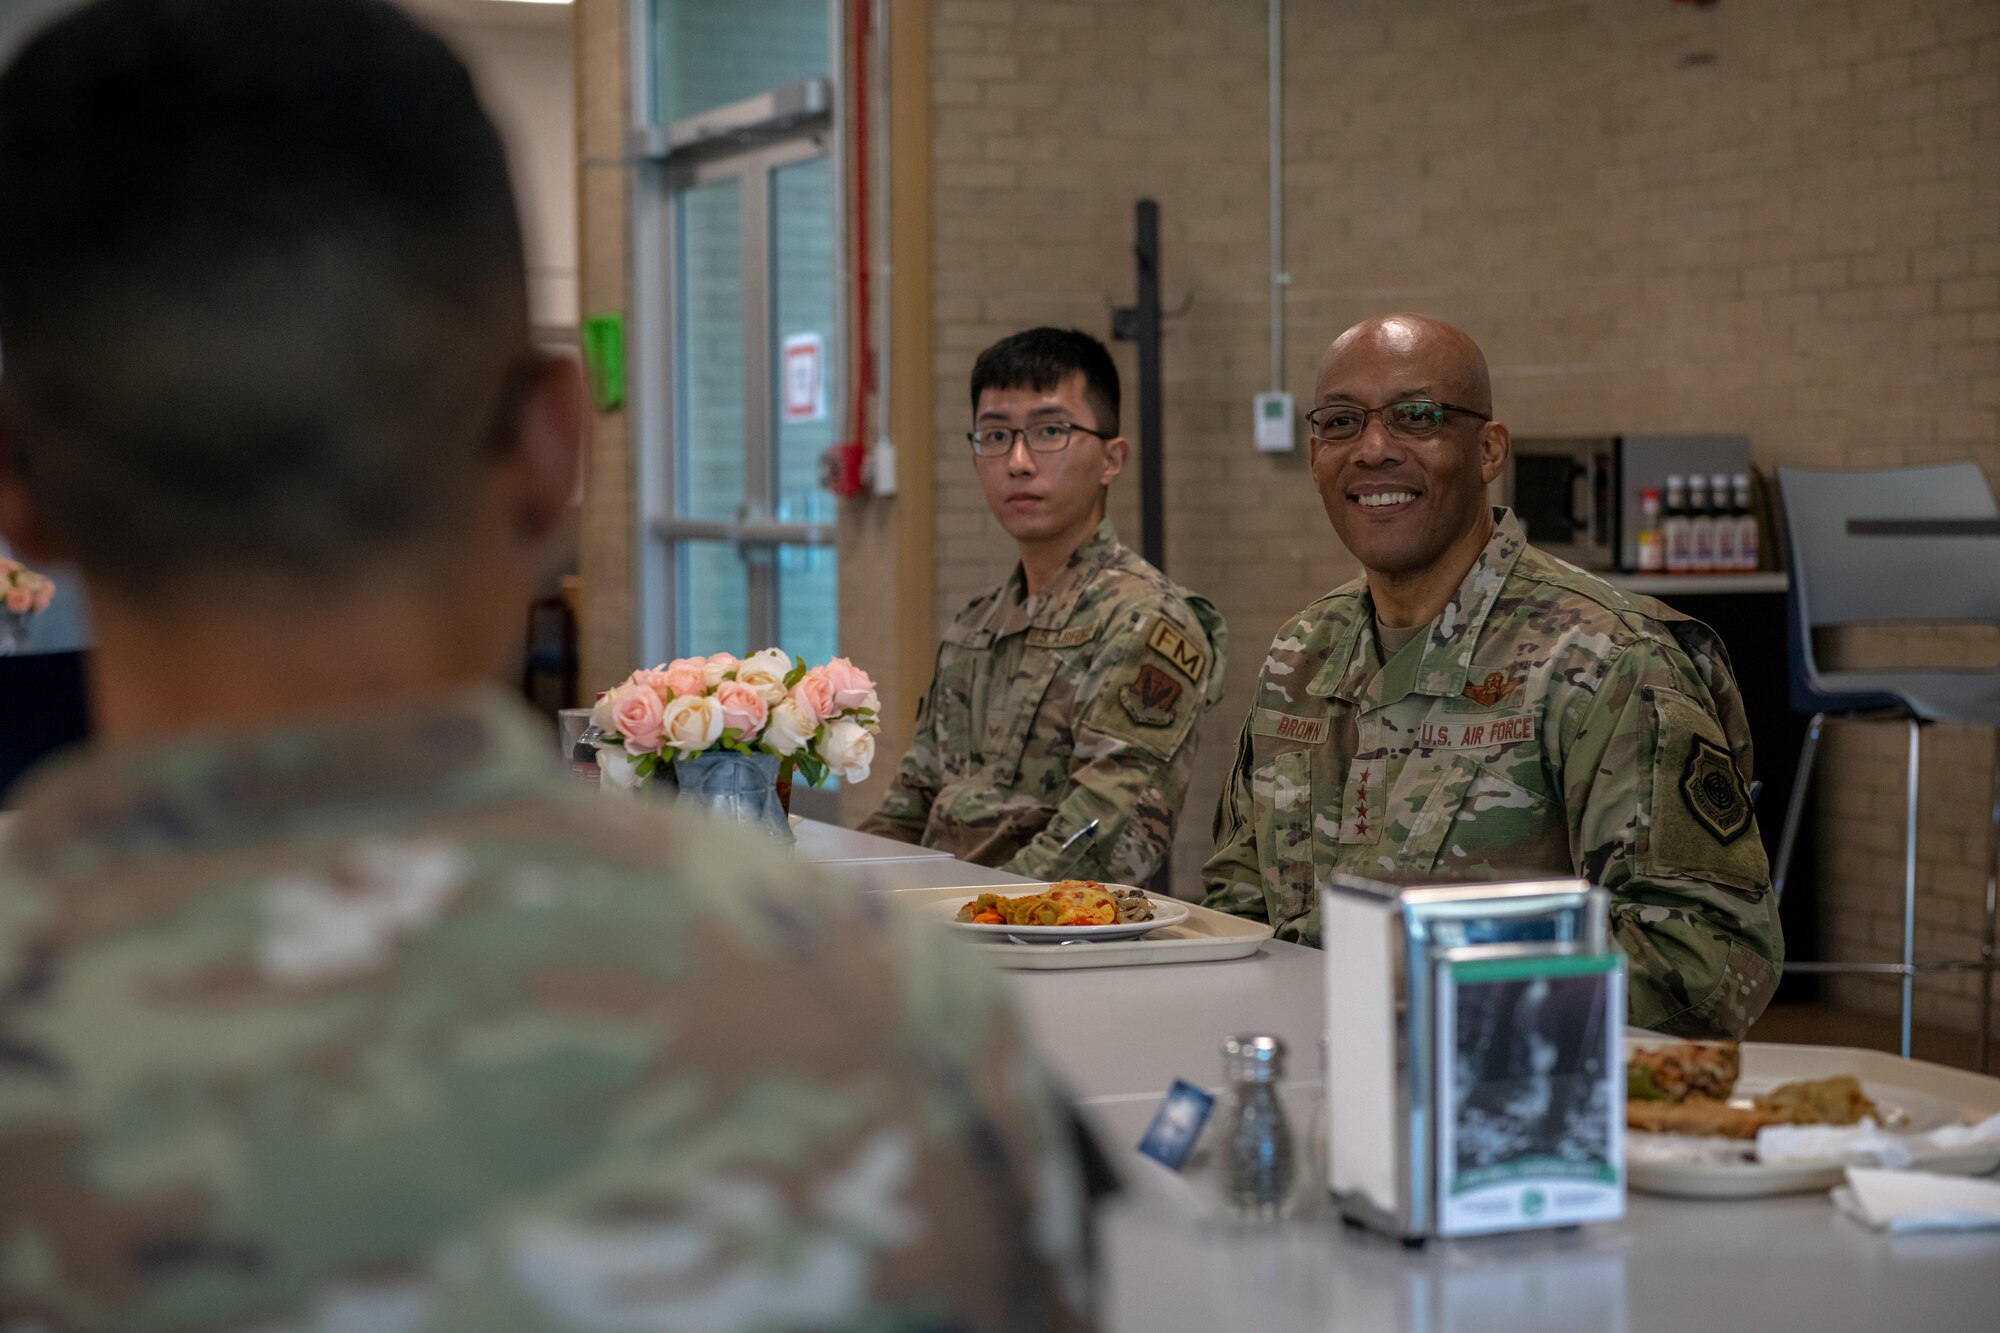 Airmen sit at a table and talk